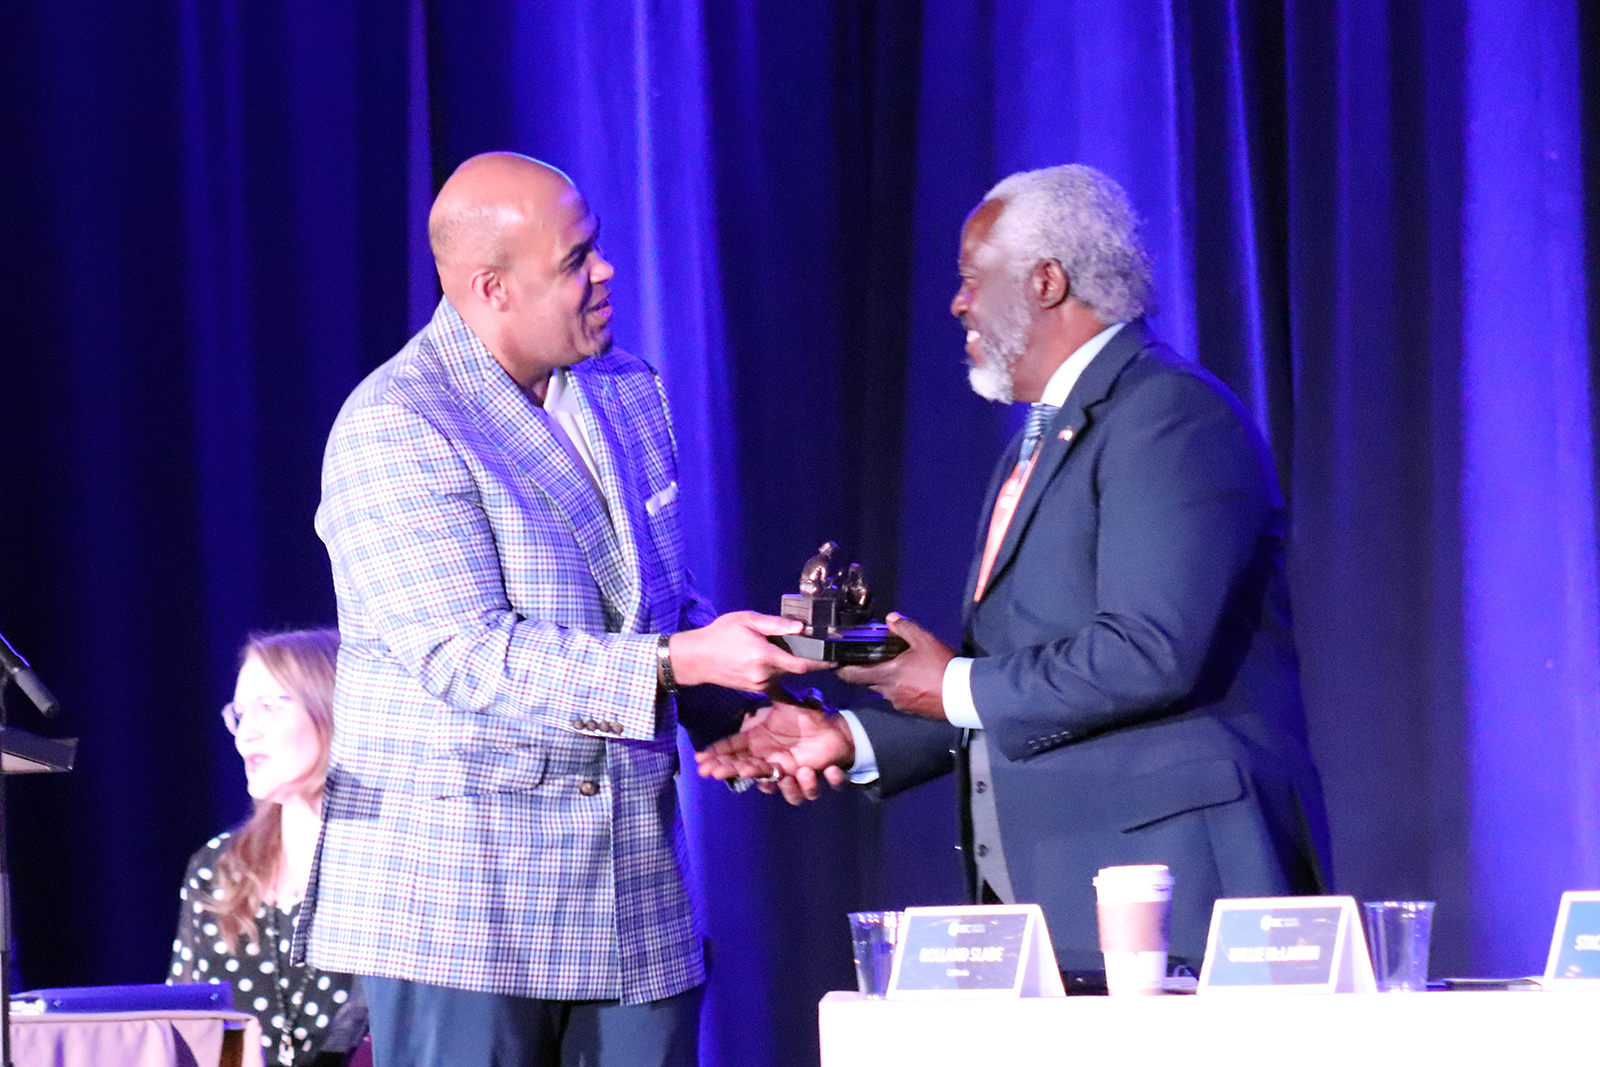 Interim Executive Committee president Willie McClaurin, left, presents a “faithful servant” award to pastor Rolland Slade, right, during an Executive Committee meeting, Monday, June 13, 2022. RNS photo by Adelle M. Banks